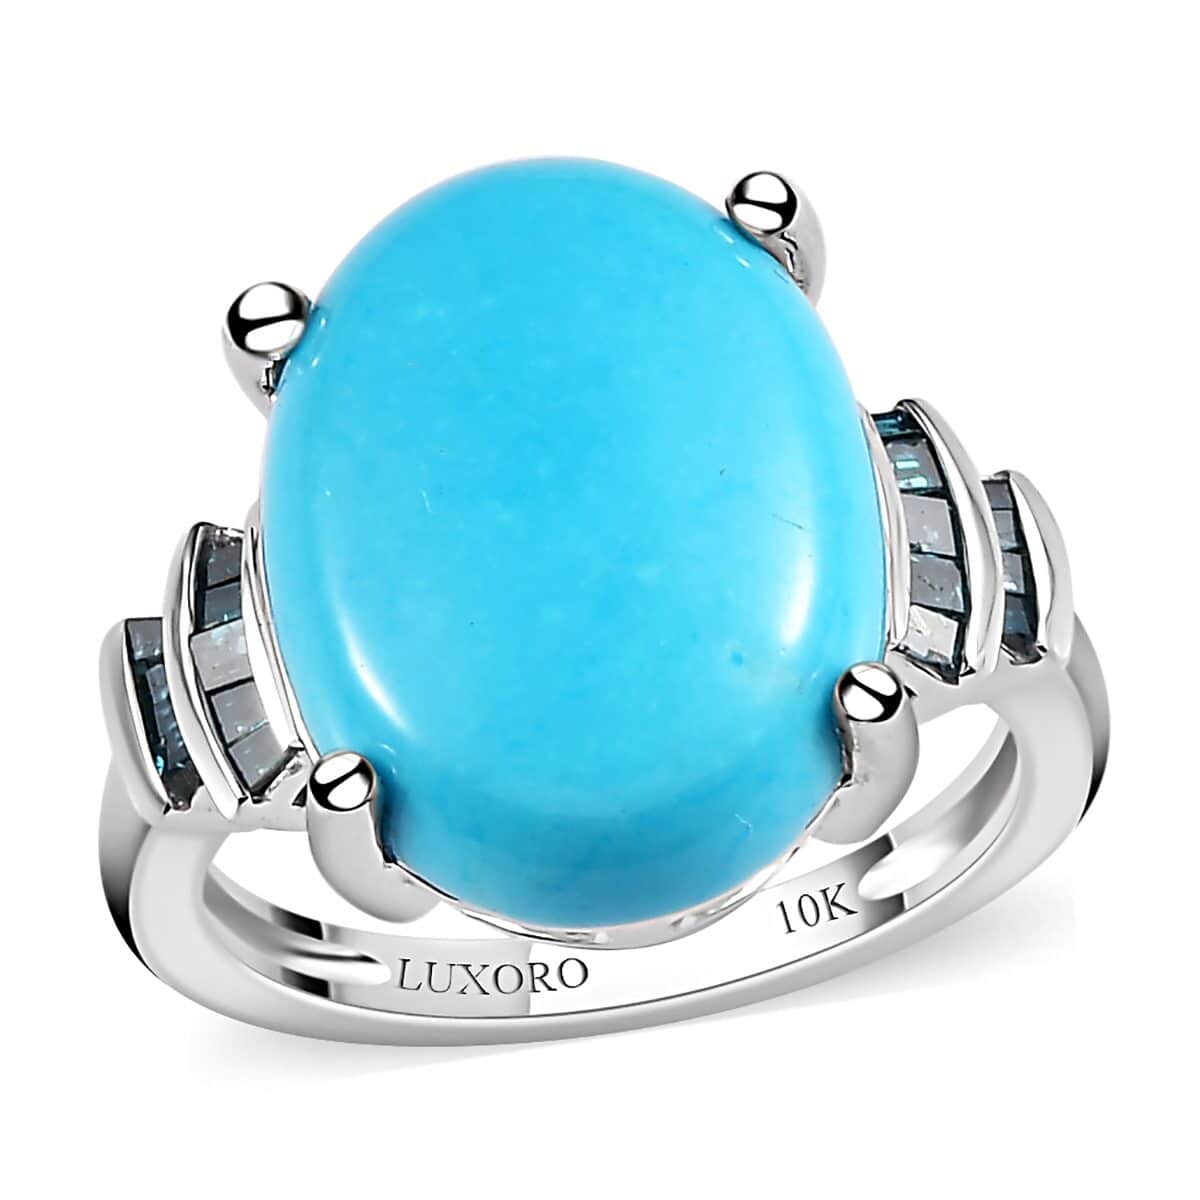 LUXORO 10K White Gold Premium American Natural Sleeping Beauty Turquoise and Blue Diamond Ring 3.70 Grams 7.65 ctw image number 0